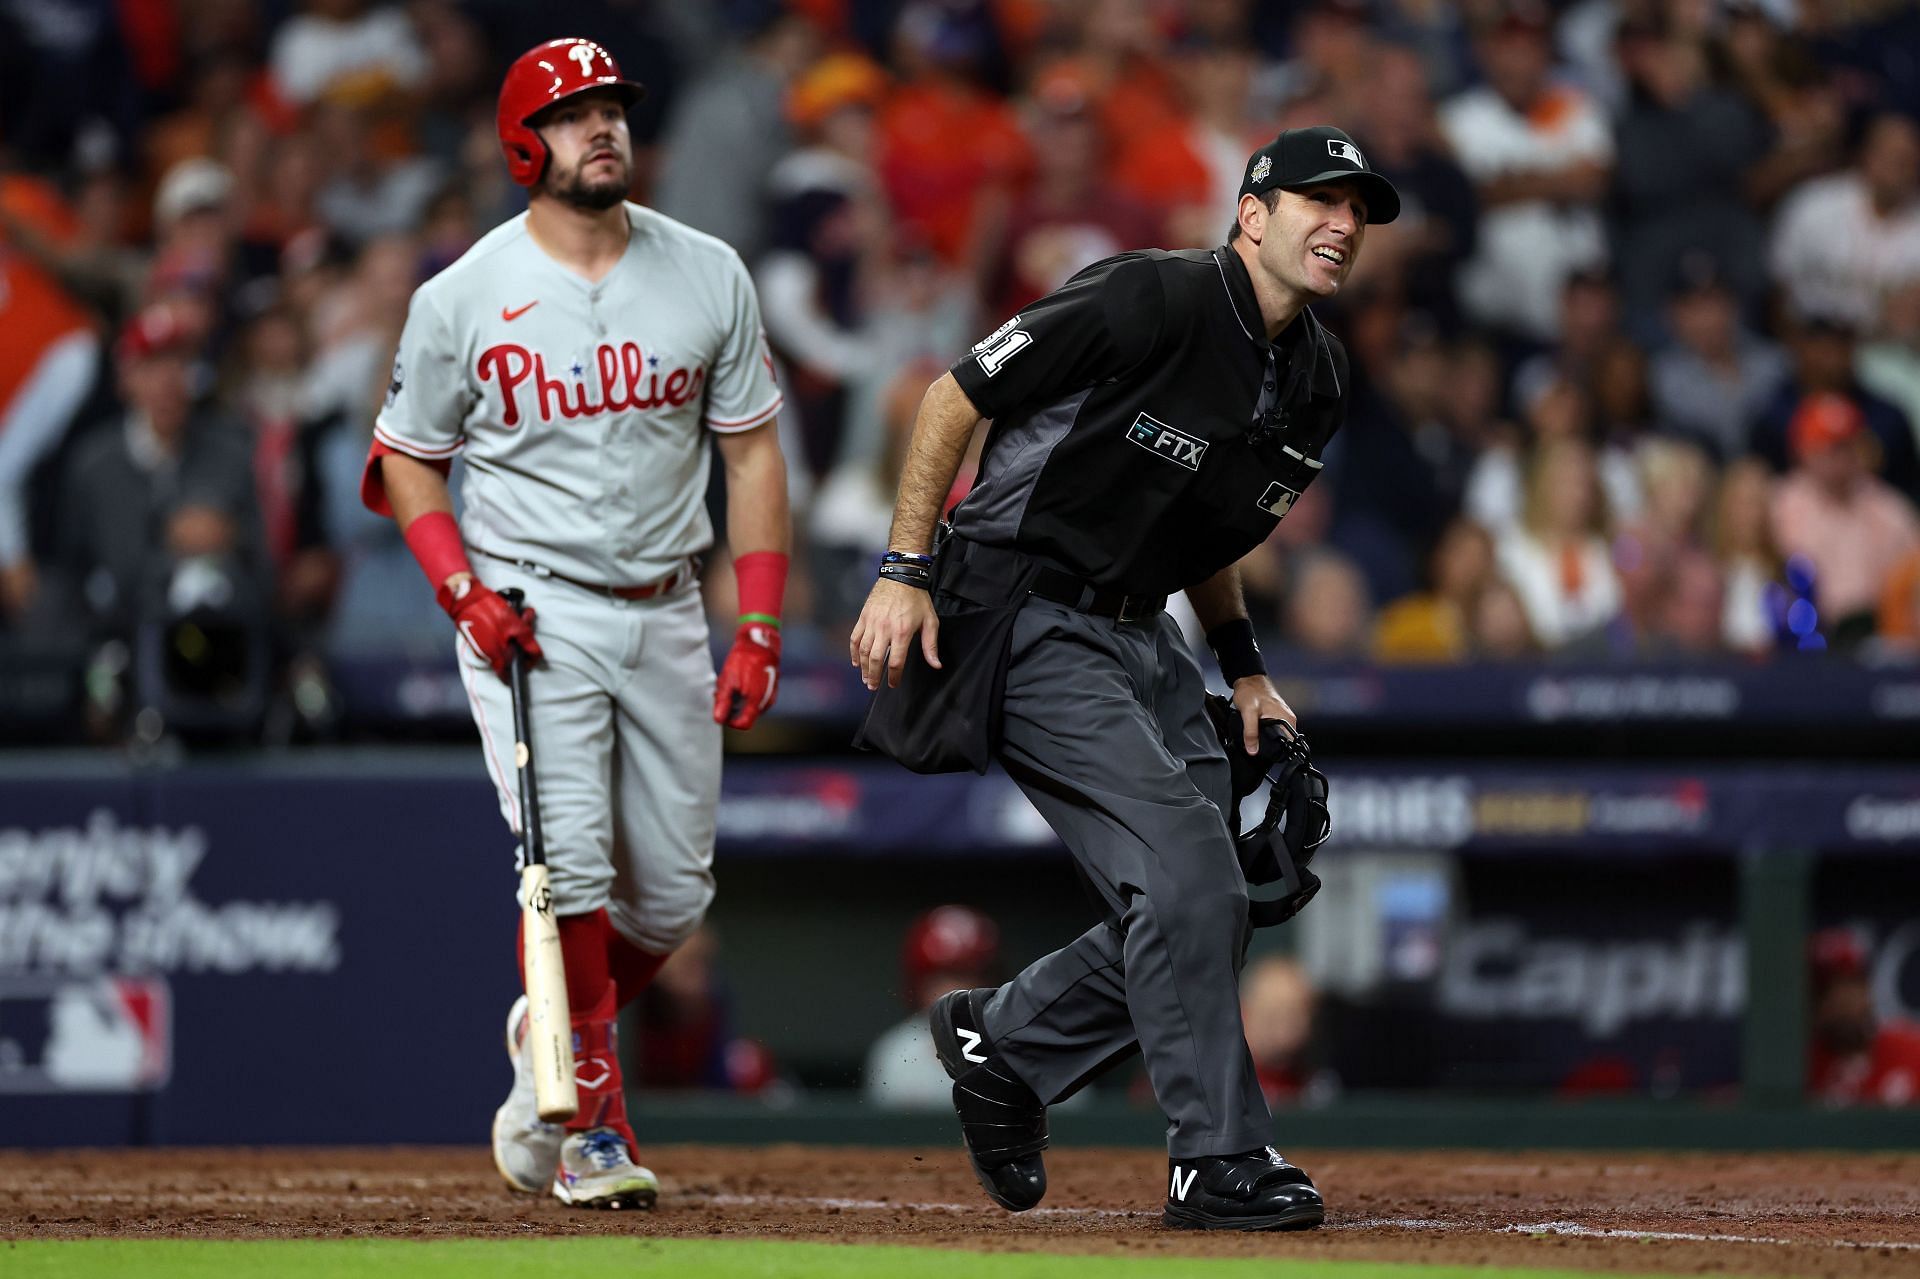 Umpire ejects Realmuto after bizarre game ball exchange – WWLP